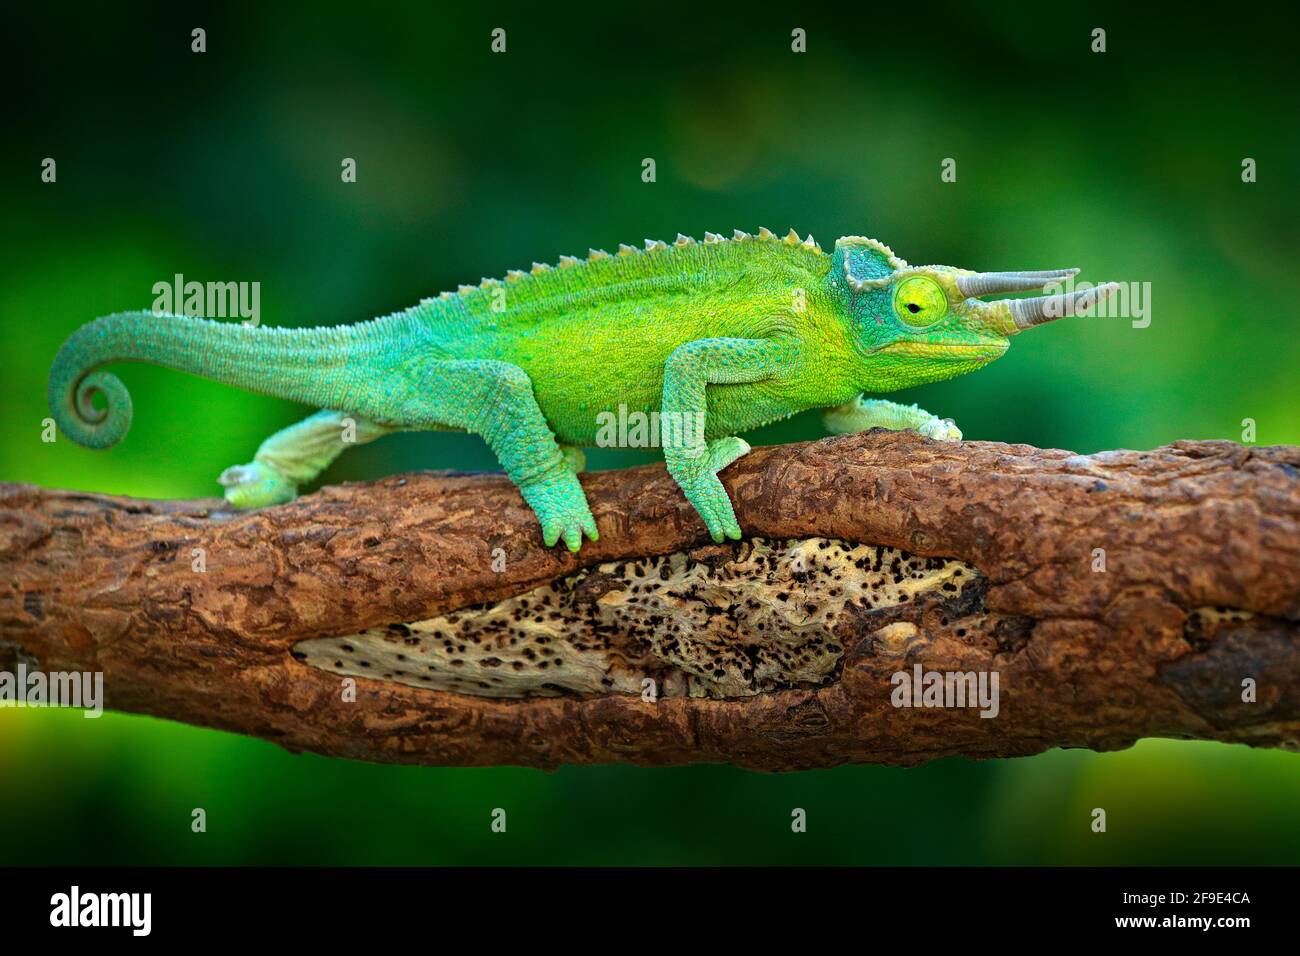 Jackson's Chameleon, Trioceros jacksonii, sitting on the branch in forest habitat. Exotic beautiful endemic green reptile with long tail from Madagasc Stock Photo